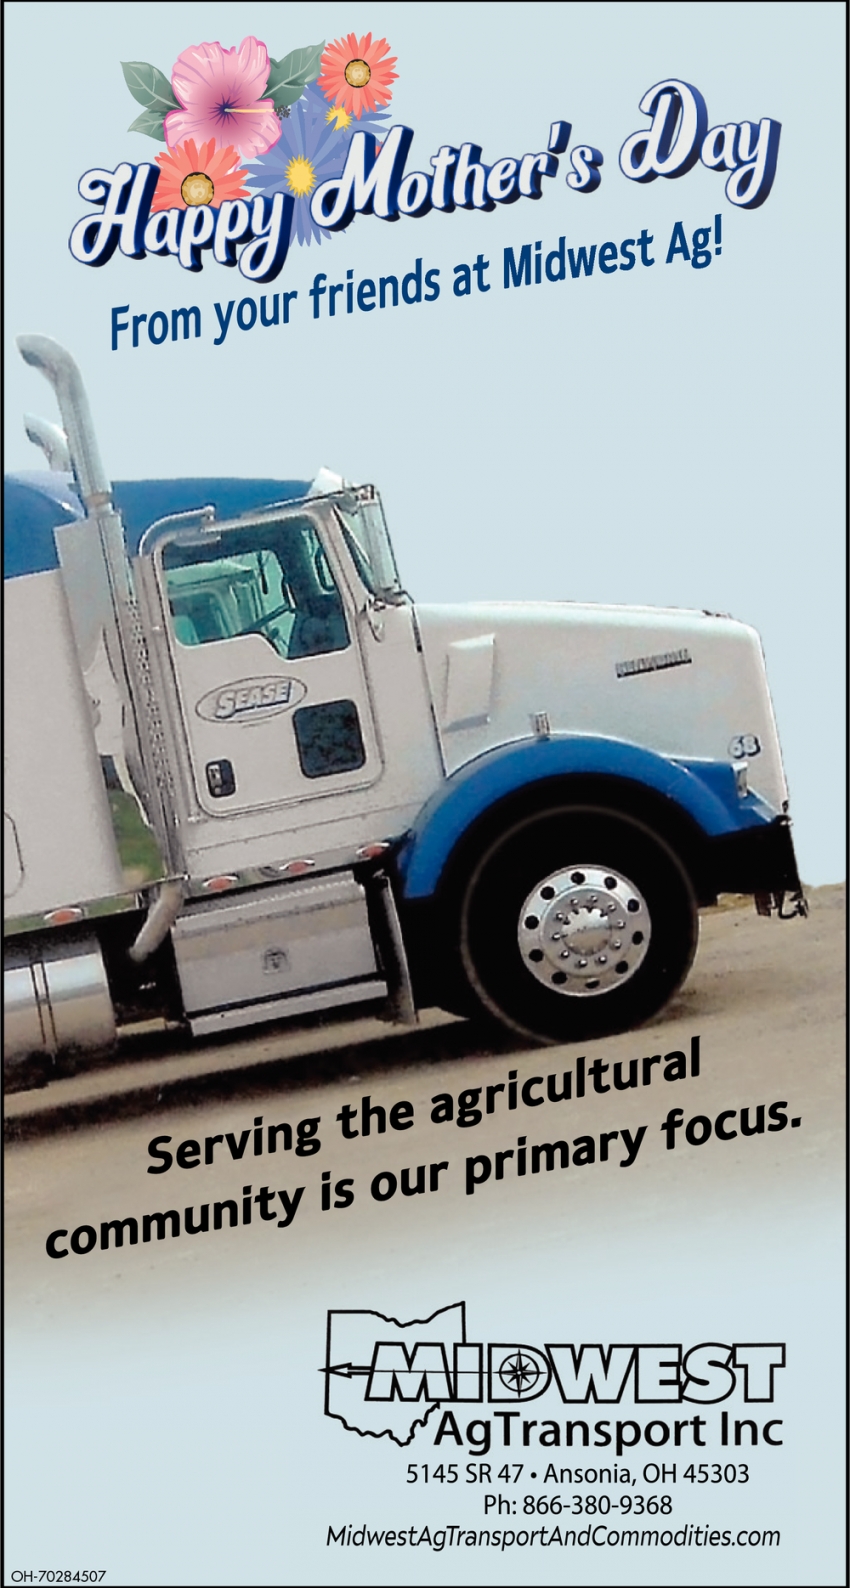 Midwest AgTransport Inc 